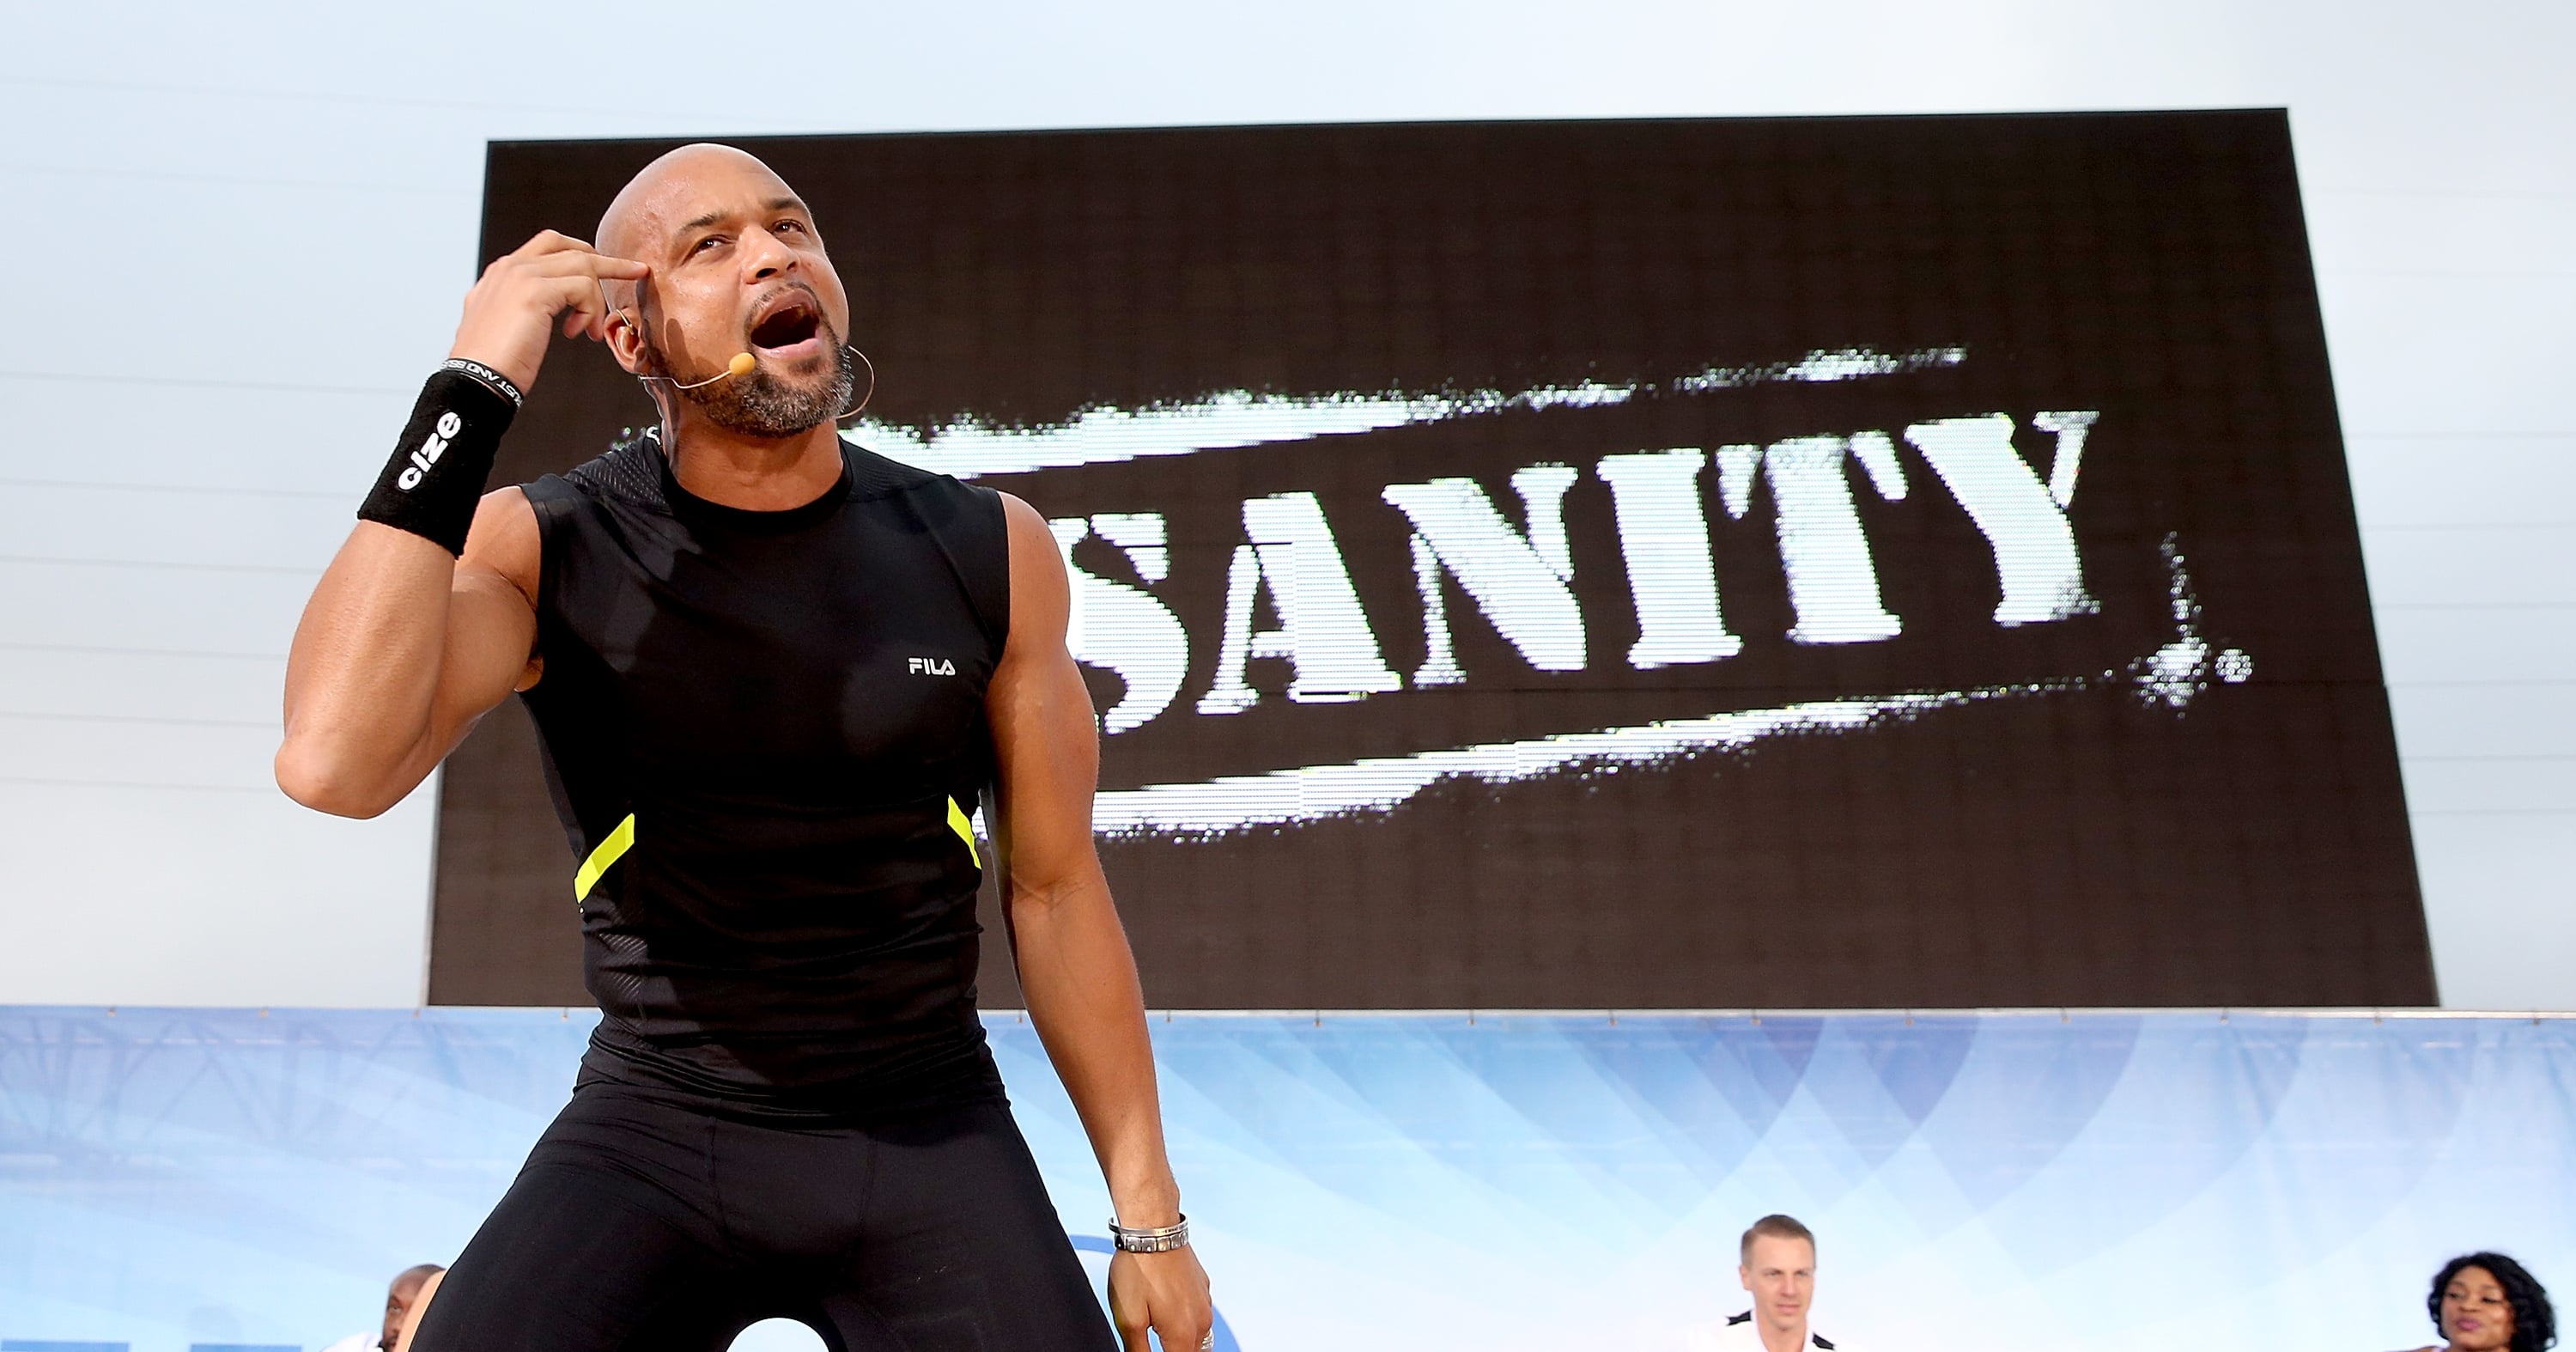 I Tried the Insanity Workout 15 Years After Its Release — and It’s Still Absolutely Brutal